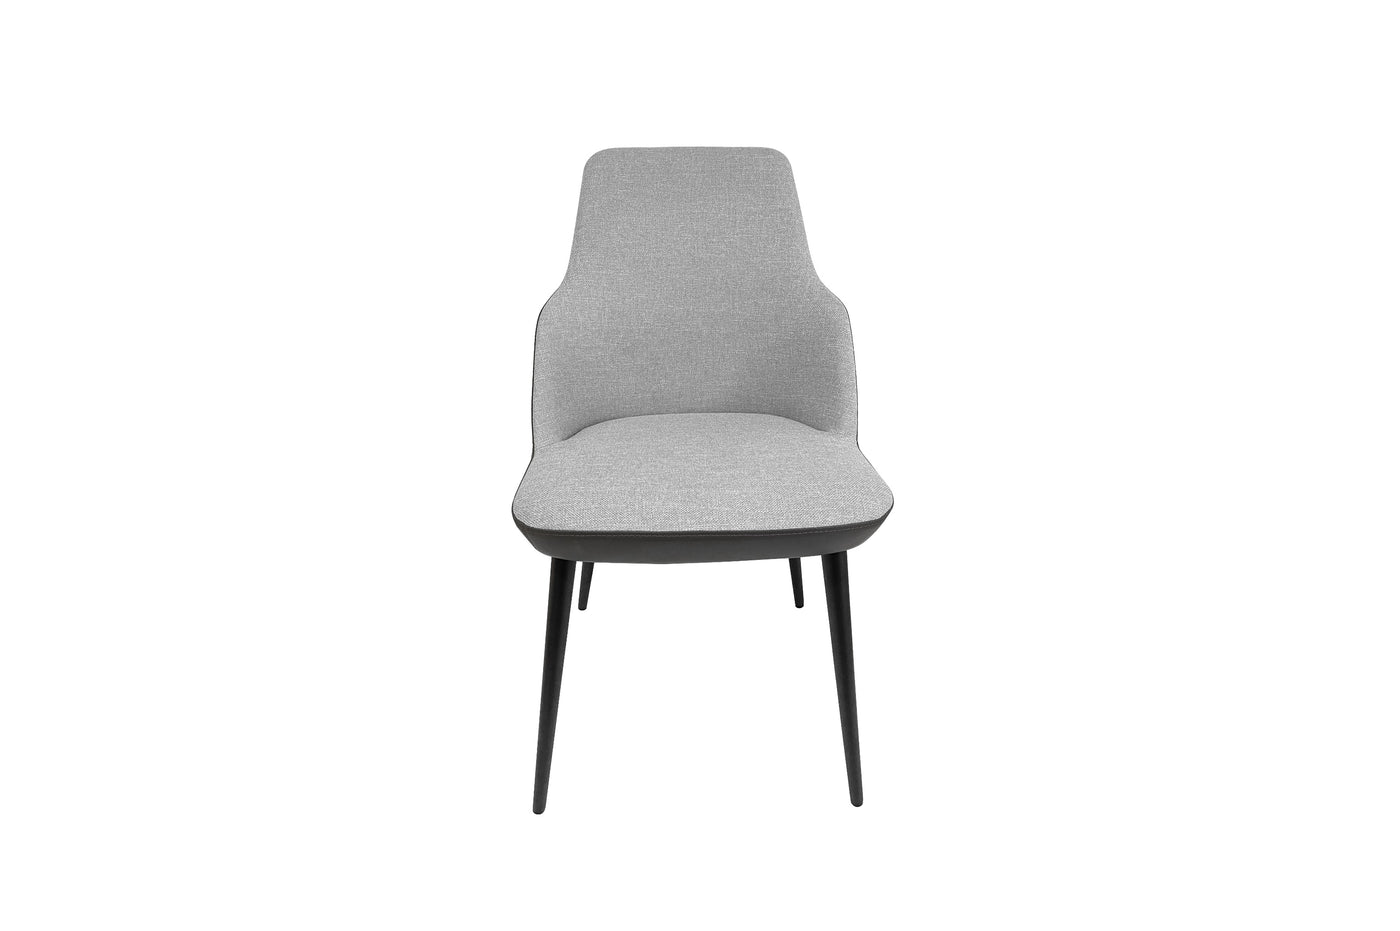 Astro G Dining Chair